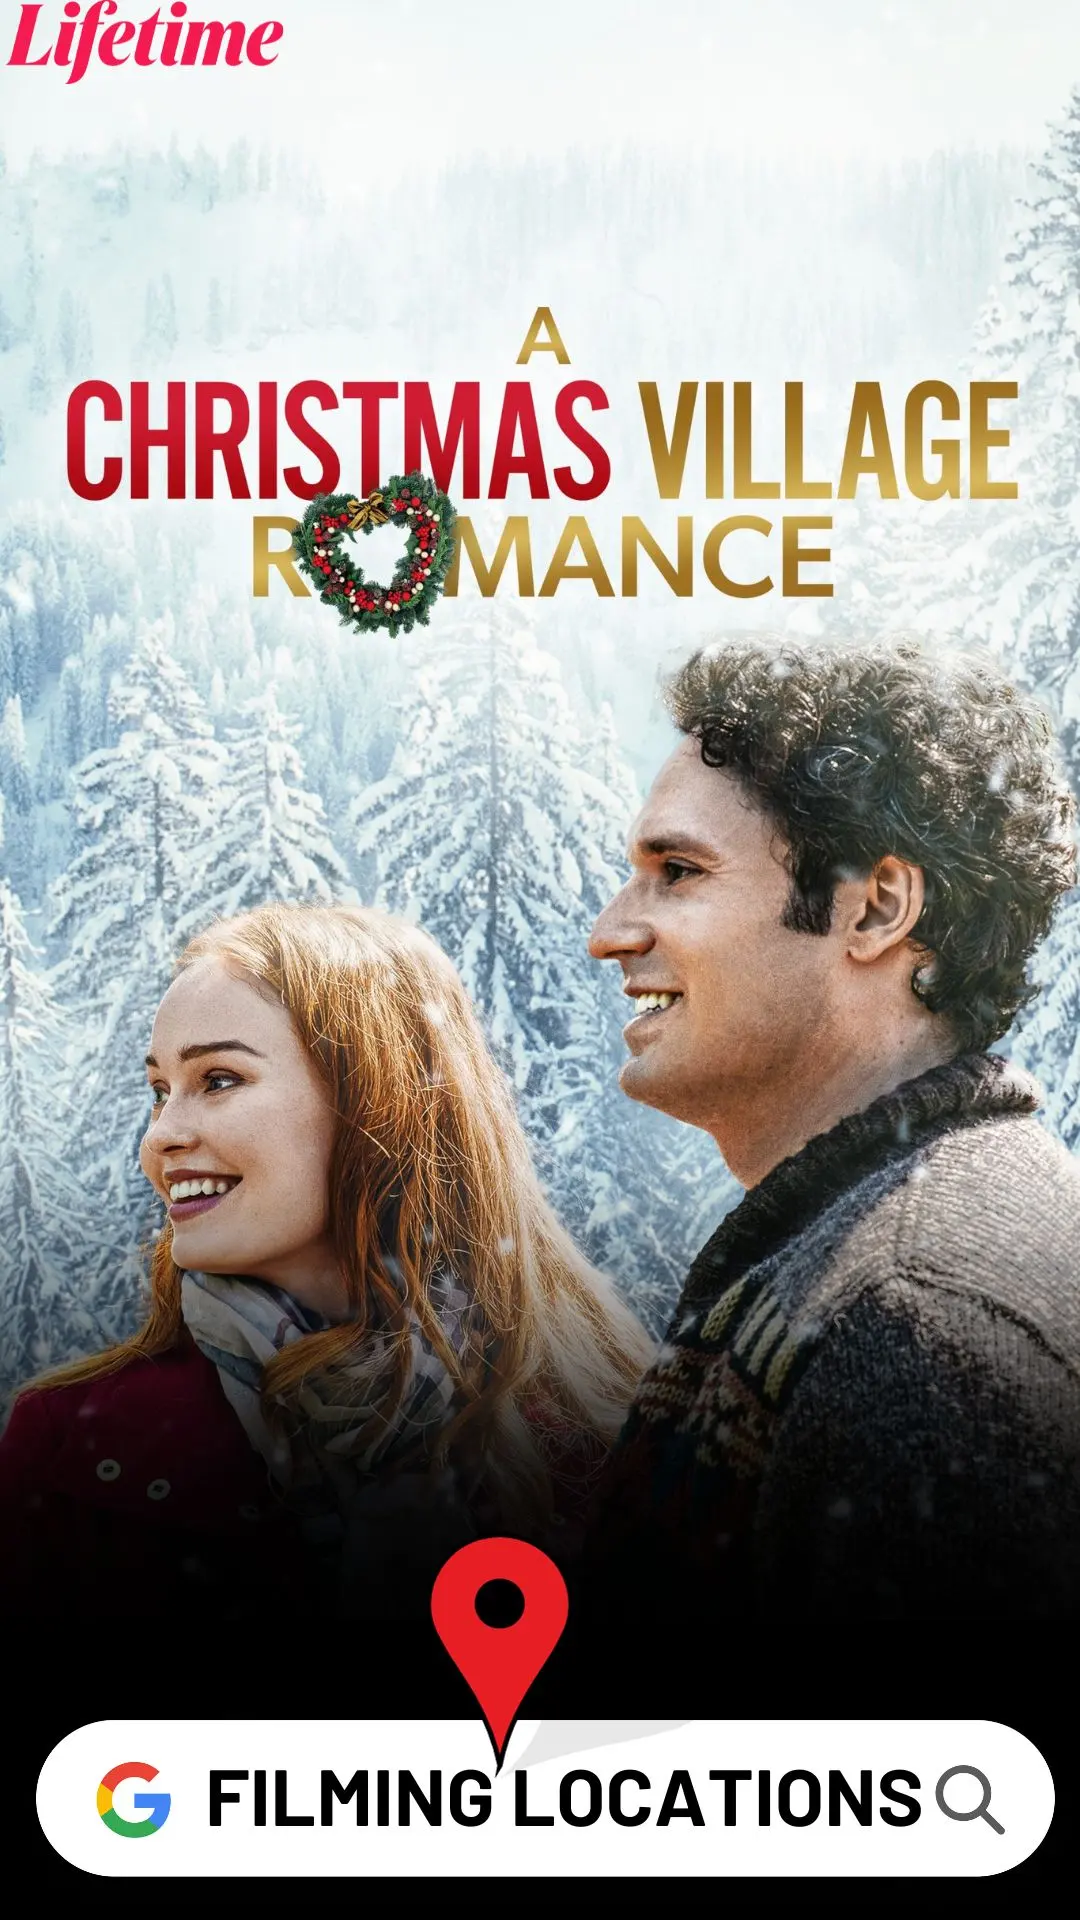 A Christmas Village Romance Filming Locations